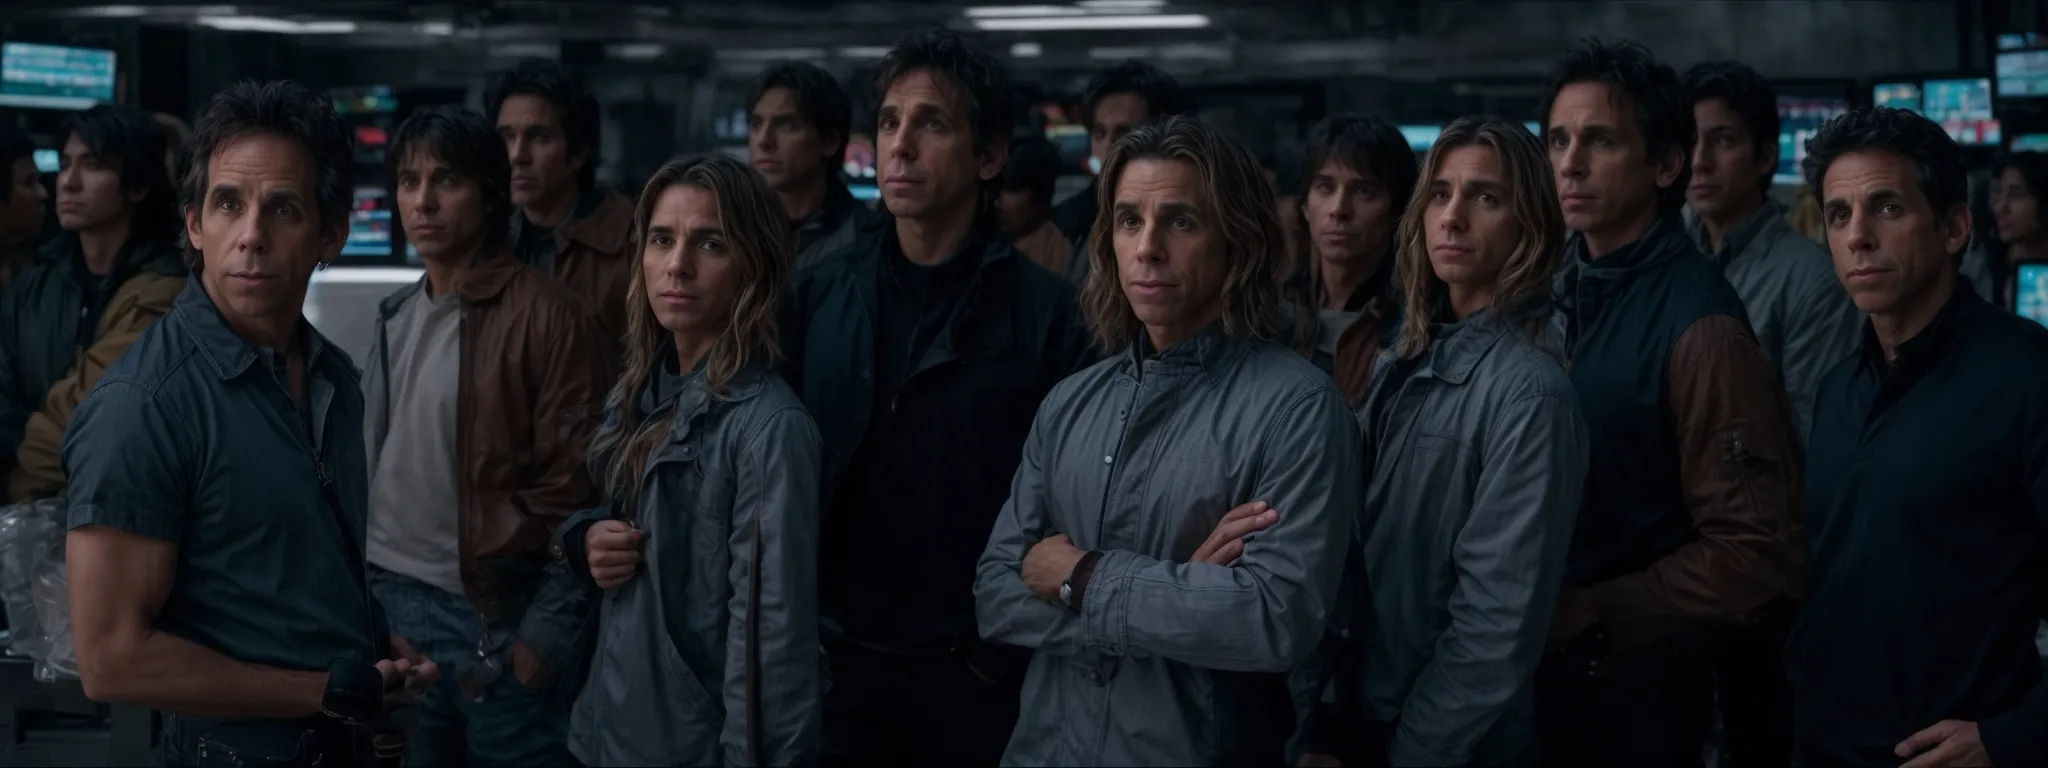 ben stiller and a group of actors pose together on a movie set, symbolizing a tech-savvy team against a backdrop of computer screens displaying search engine graphics.